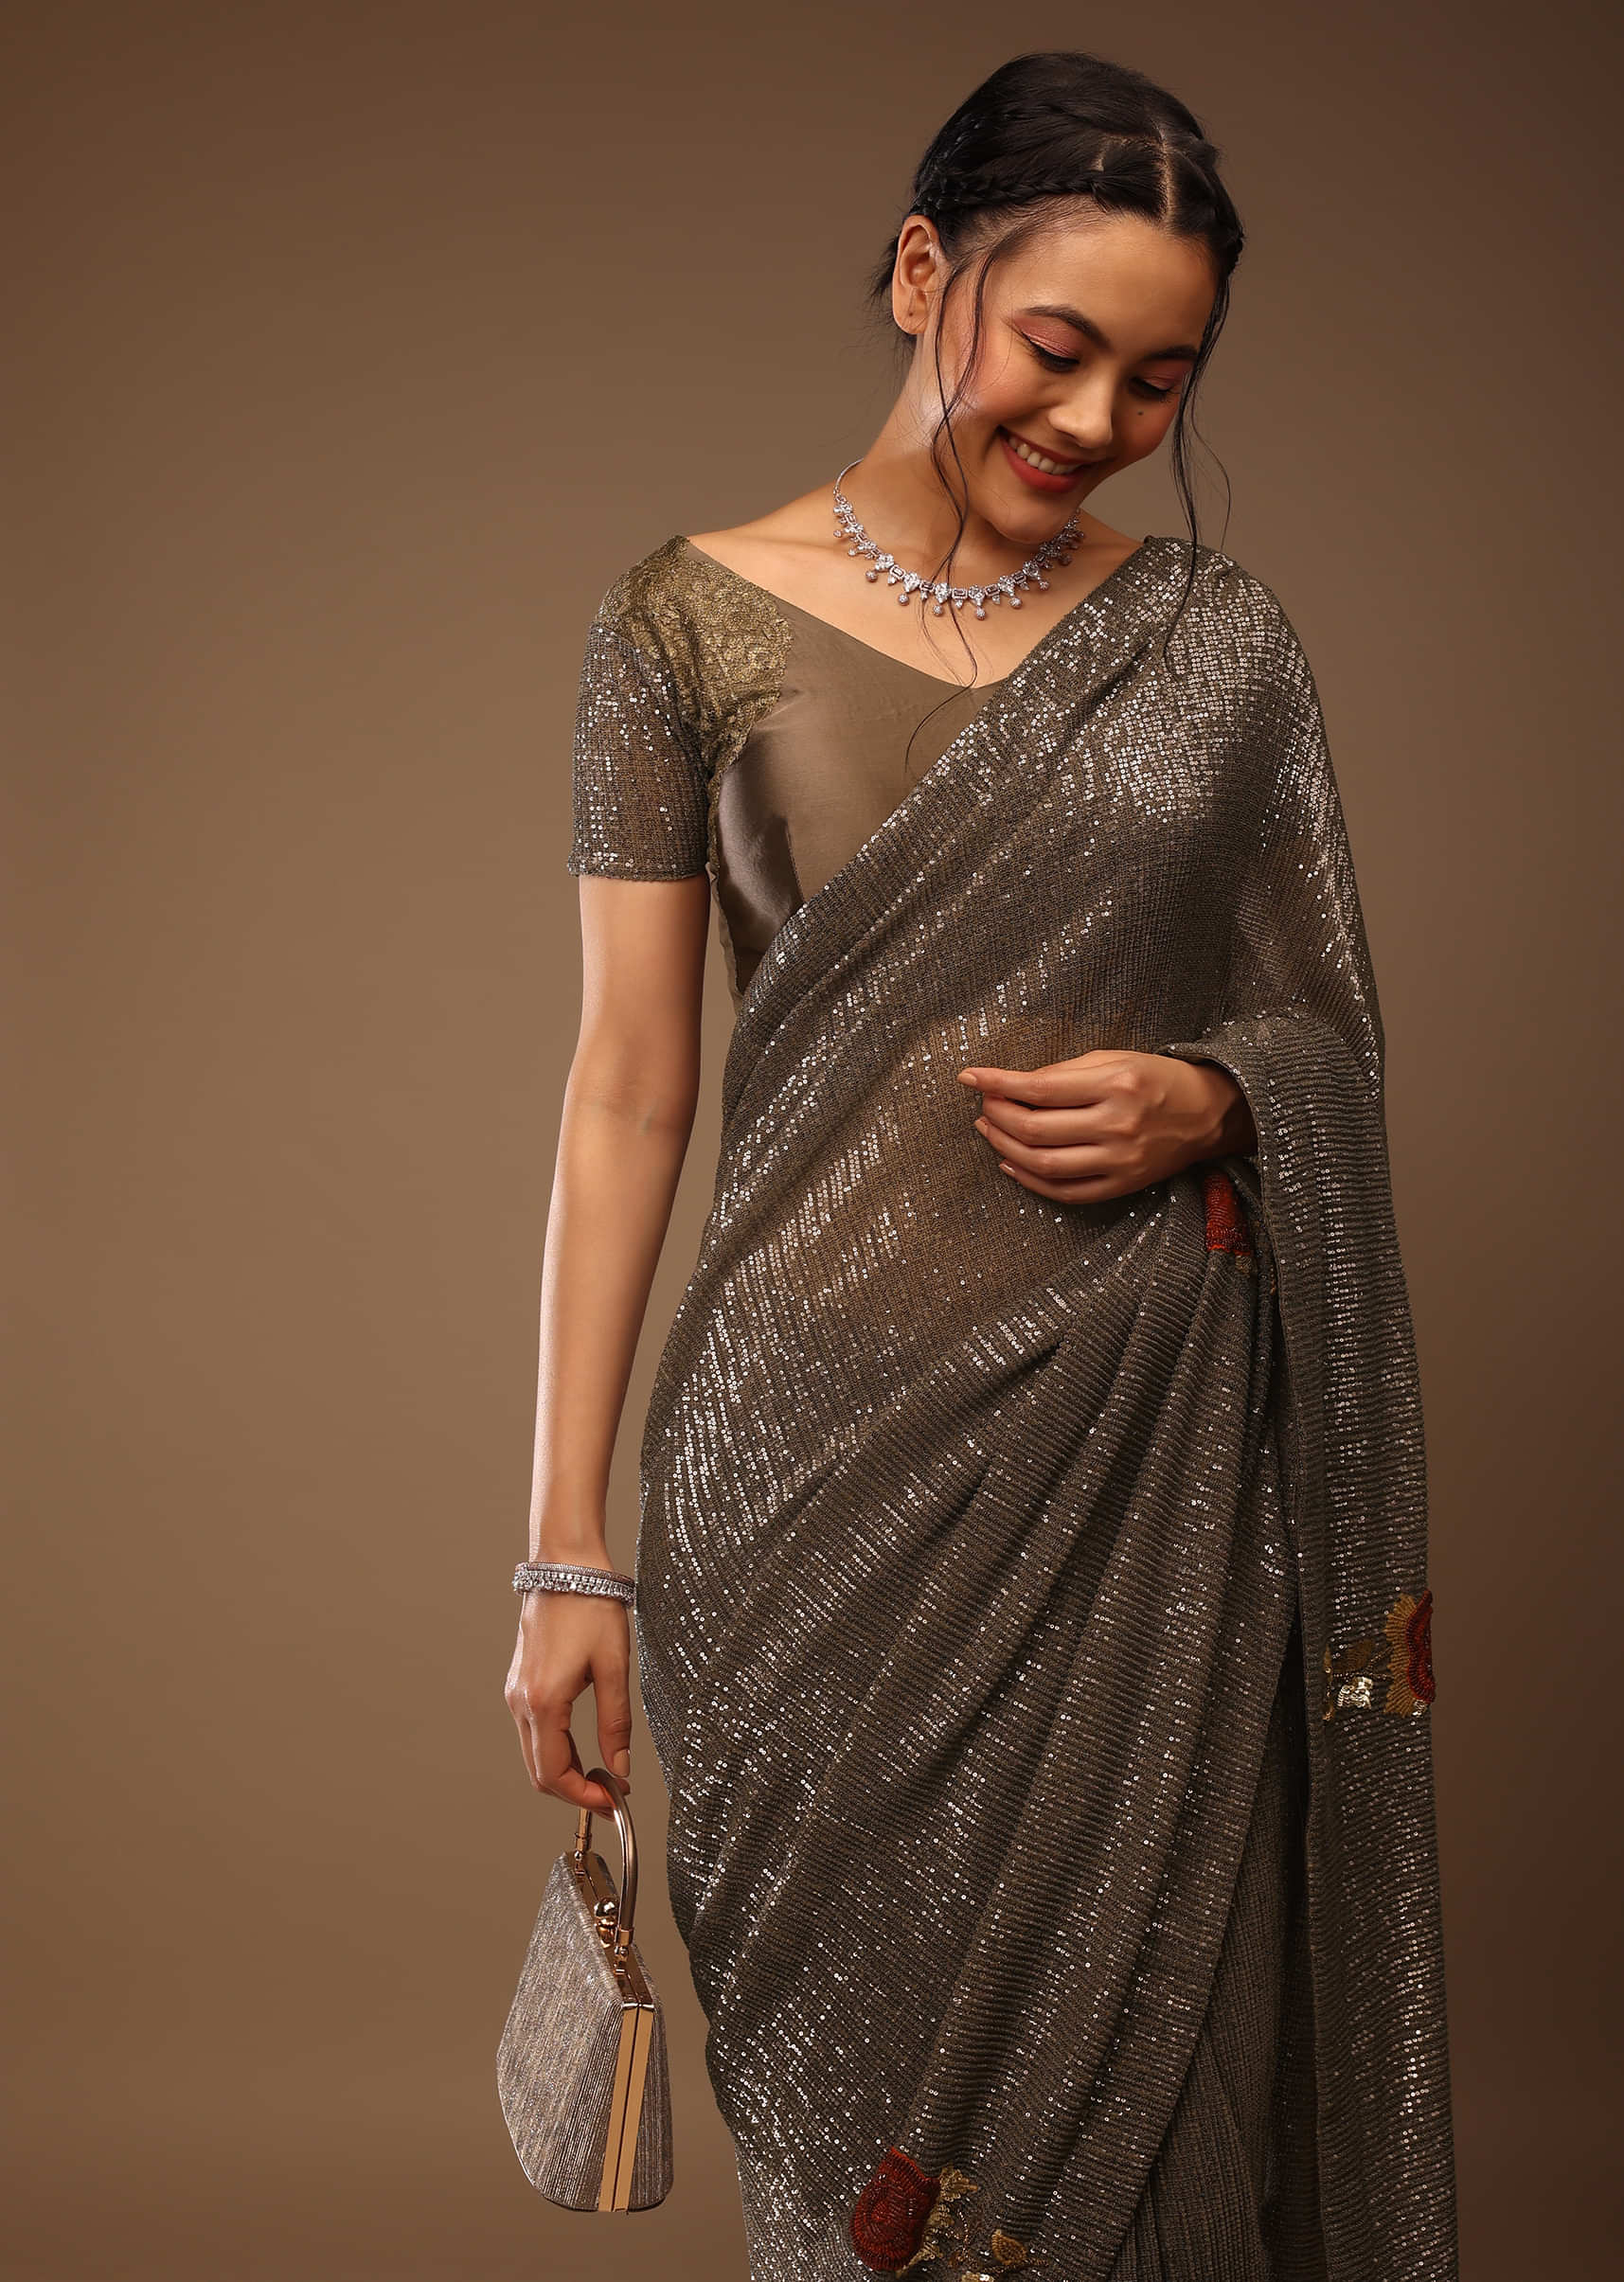 Deep Mahogany Brown Saree With Multi-Colored Sequins Floral Motifs Embroidery 